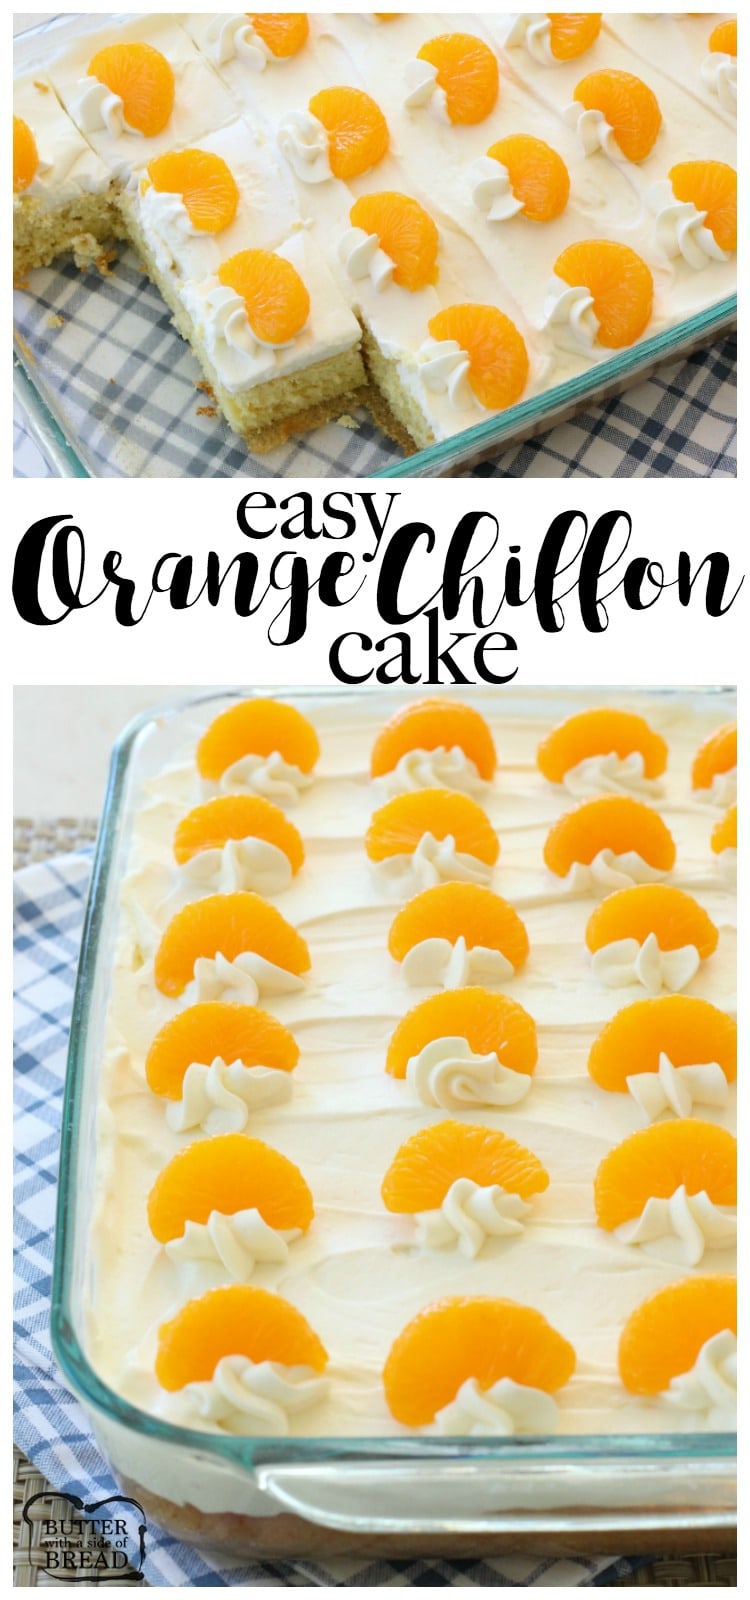 Orange Chiffon Cake is a light, delicate and perfectly sweet citrus cake that's incredibly easy to make! Perfect for family gatherings and parties as it's baked in a 9x13. You can double it to make a sheet cake too! Easy chiffon cake recipe from Butter With A Side of Bread